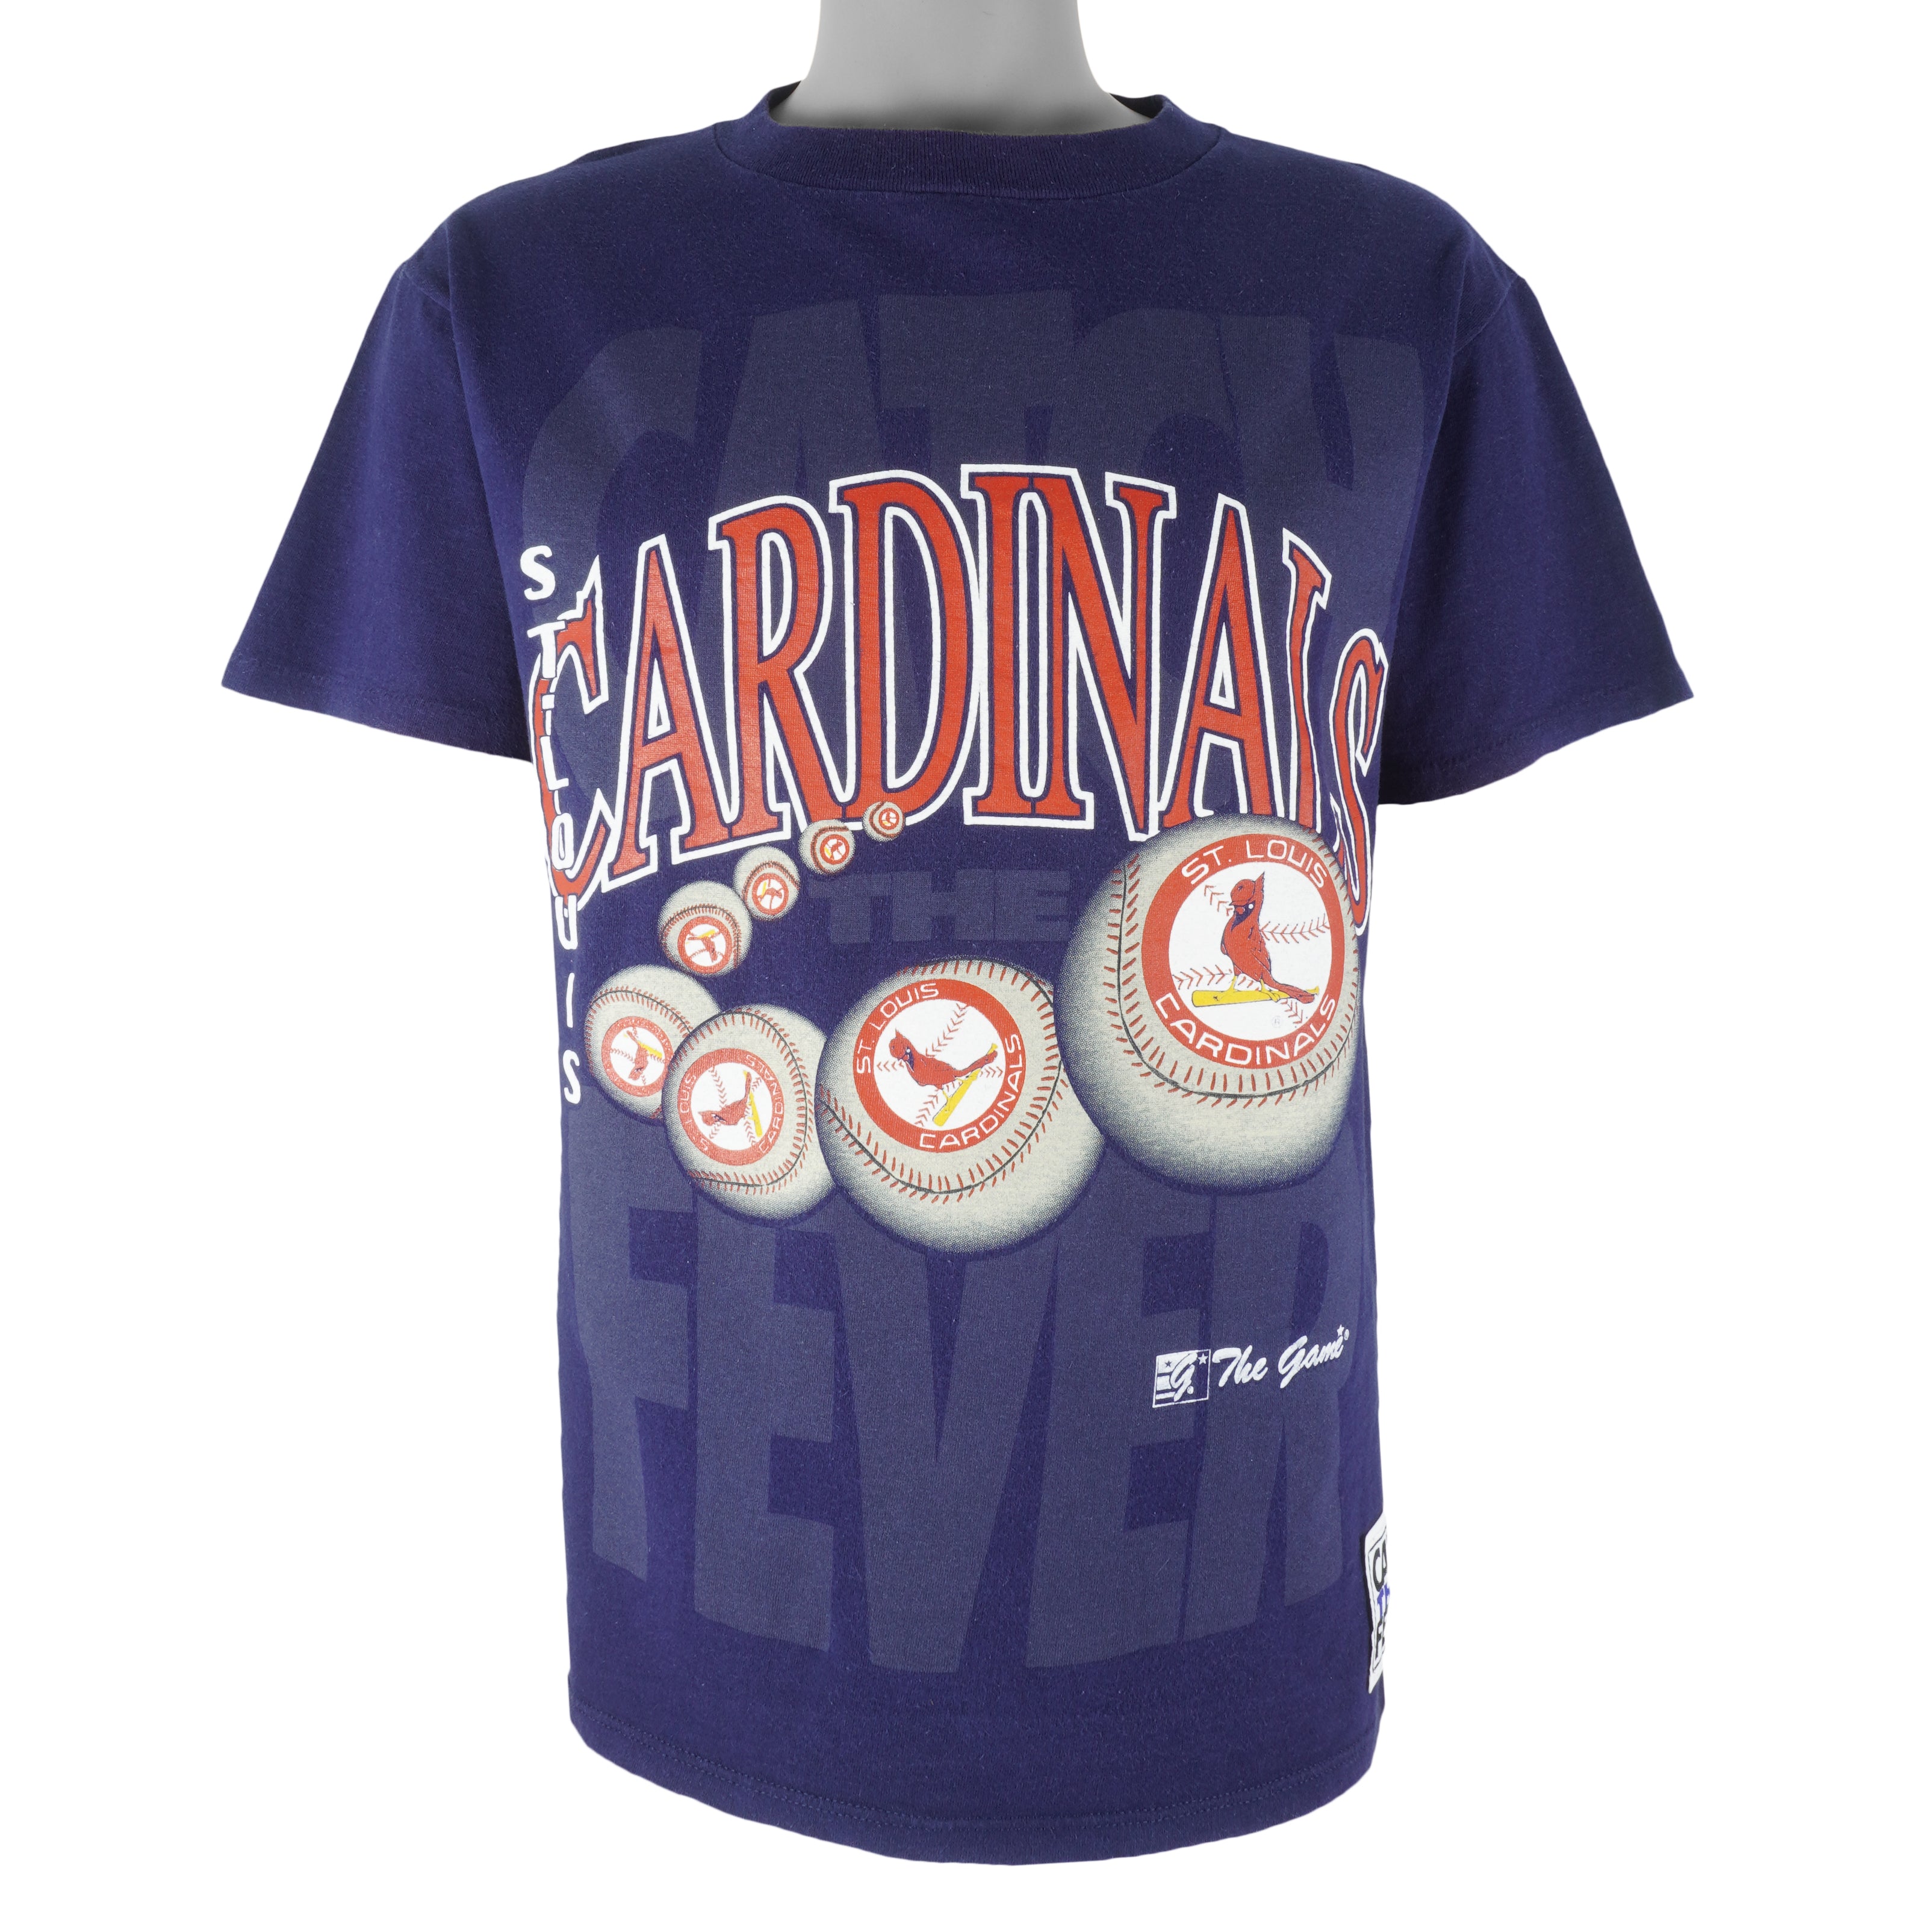 Vintage MLB (The Game) - St. Louis Cardinals Catch The Fever T-Shirt 1990s Medium